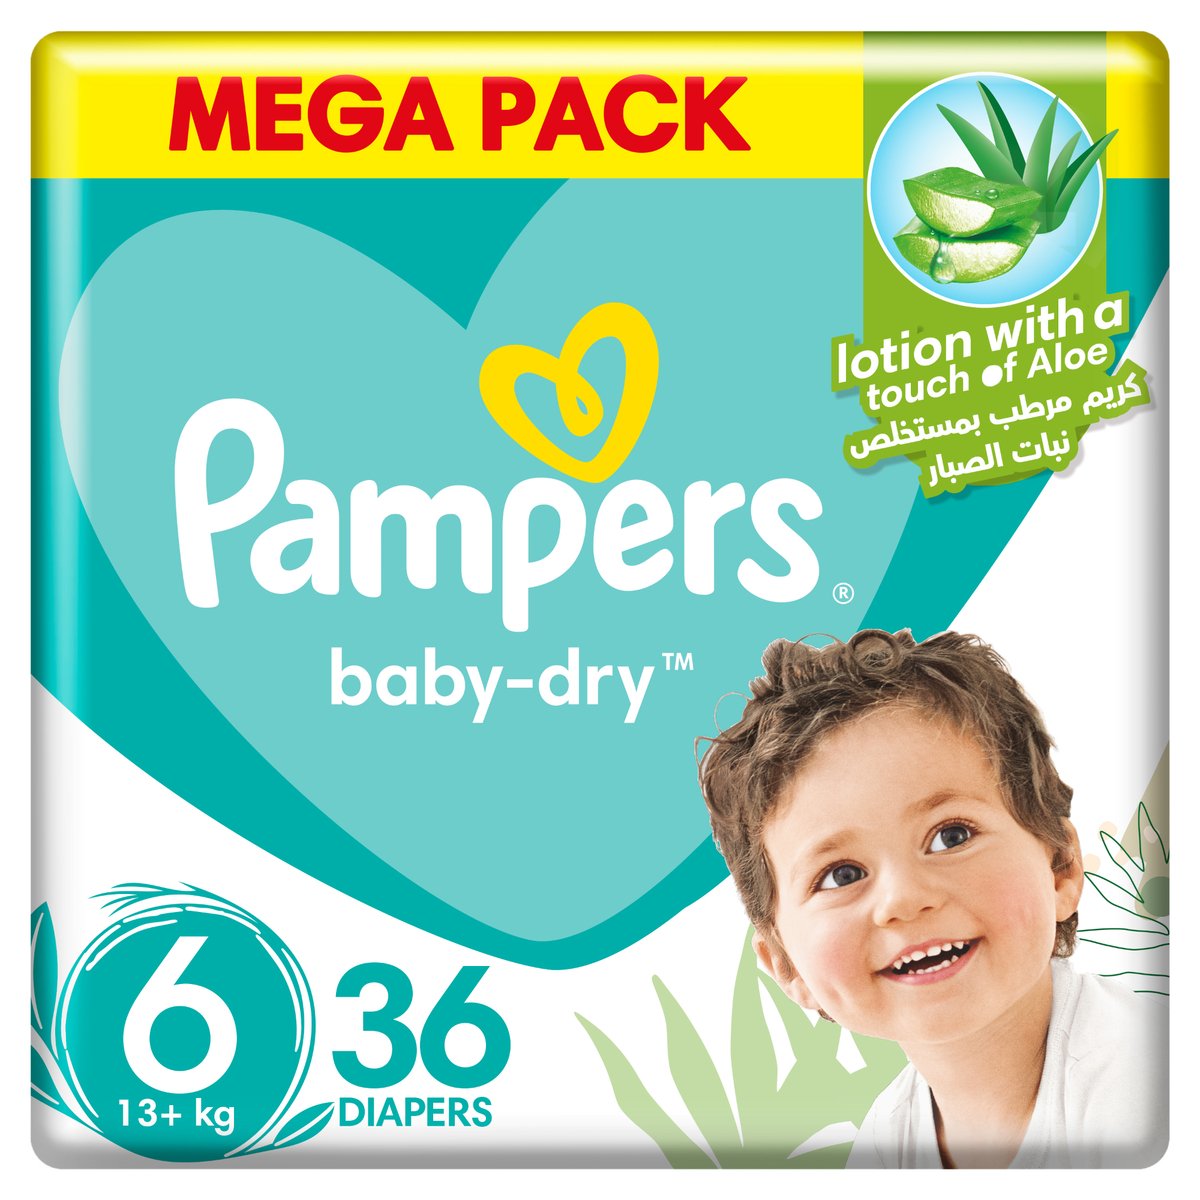 Pampers Baby-Dry Taped Diapers with Aloe Vera Lotion, Leakage Protection, Size 6, 13+kg, 36 pcs